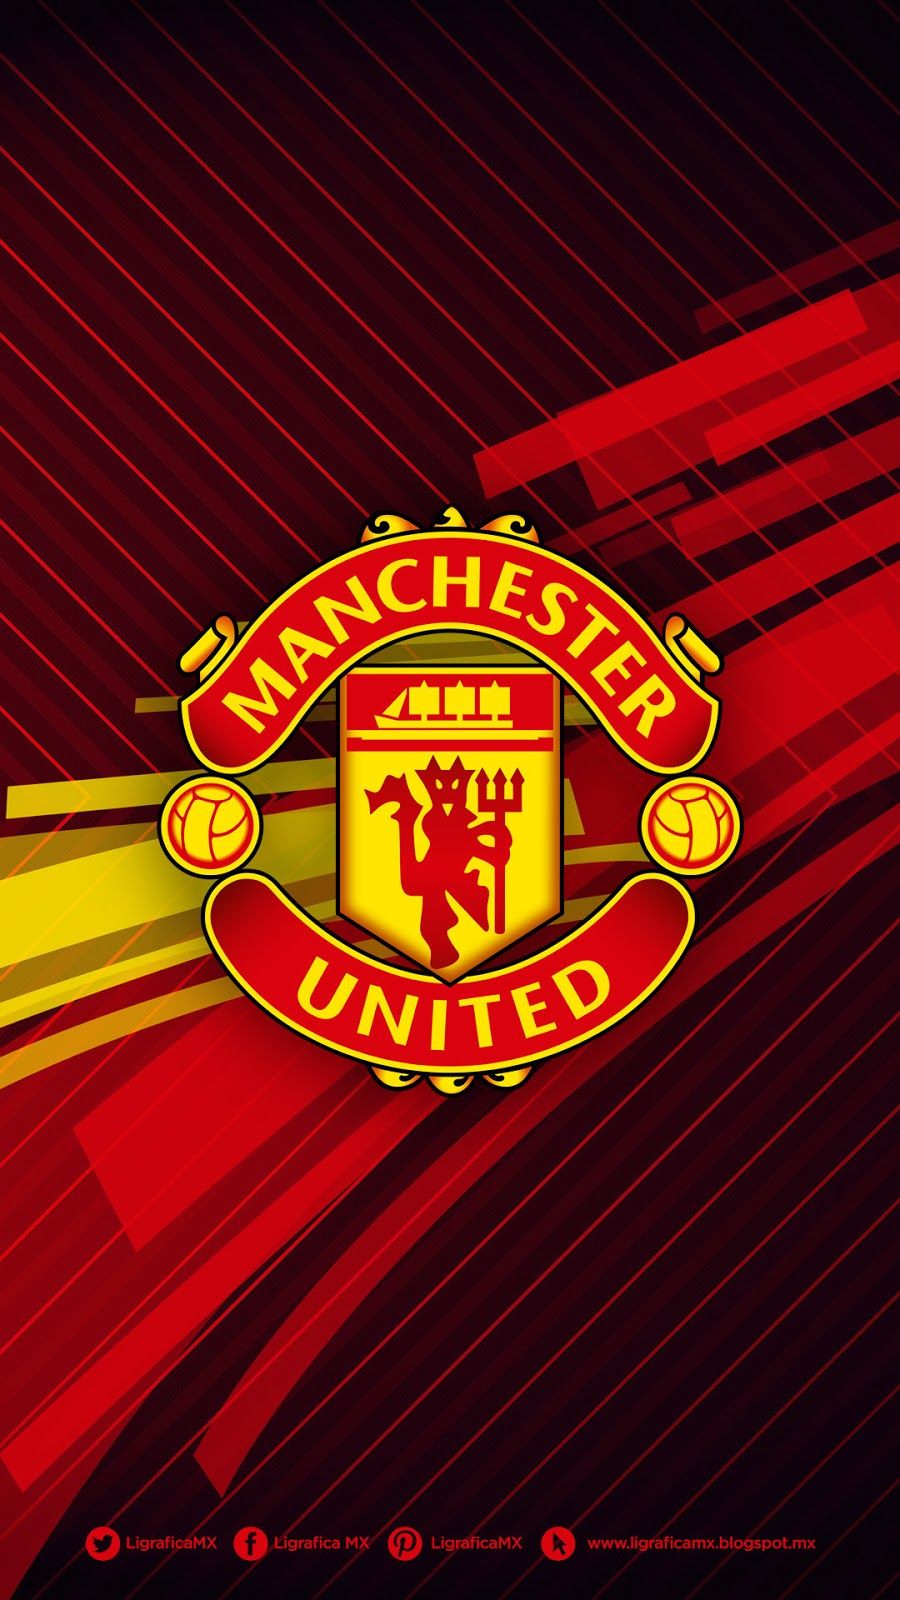 manchester united iphone wallpaper HD. Manchester united wallpaper, Manchester united wallpaper iphone, Manchester united